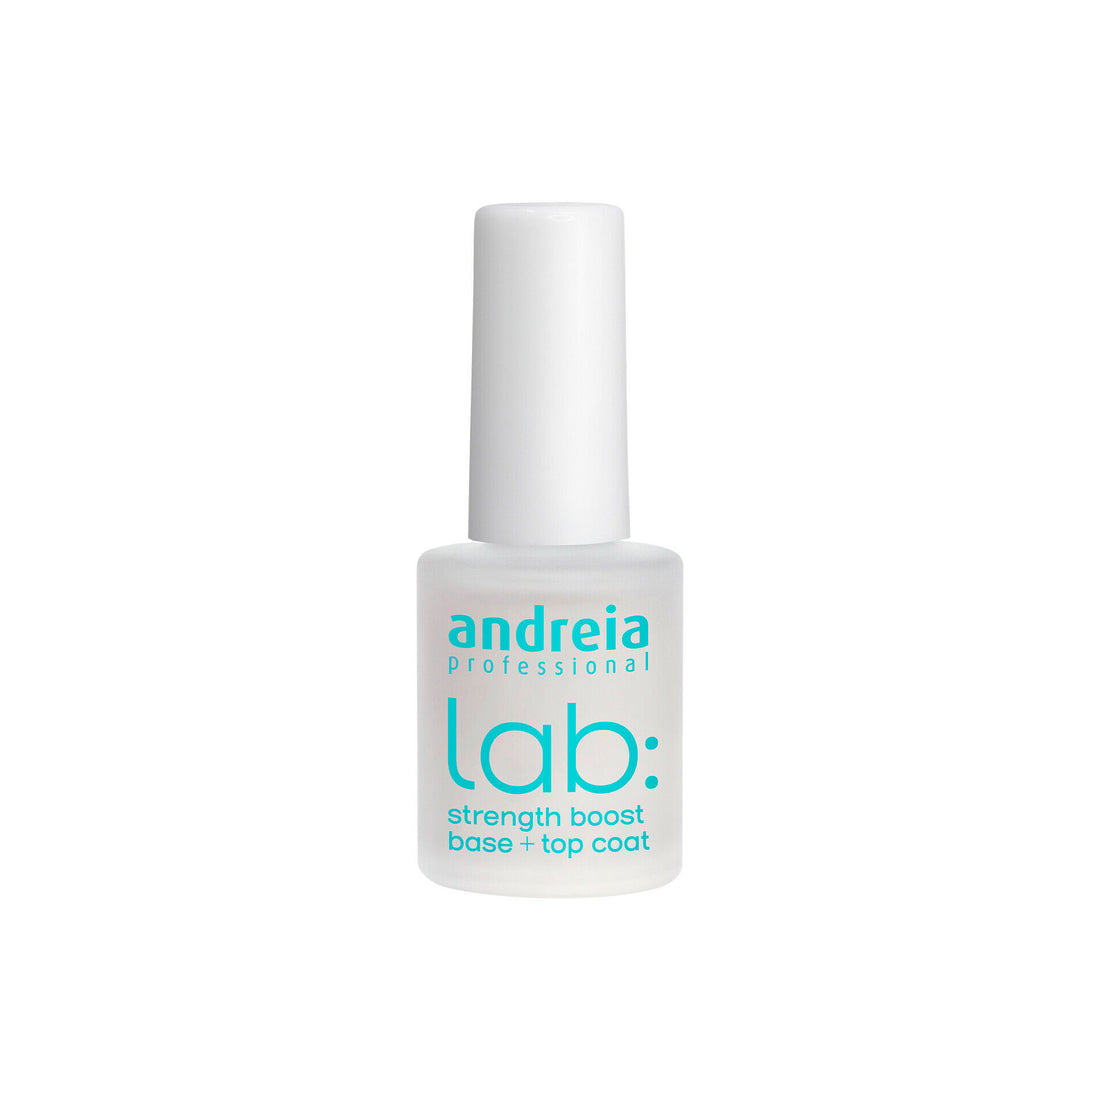 Andreia Lab Base + Top Coat Fortificante